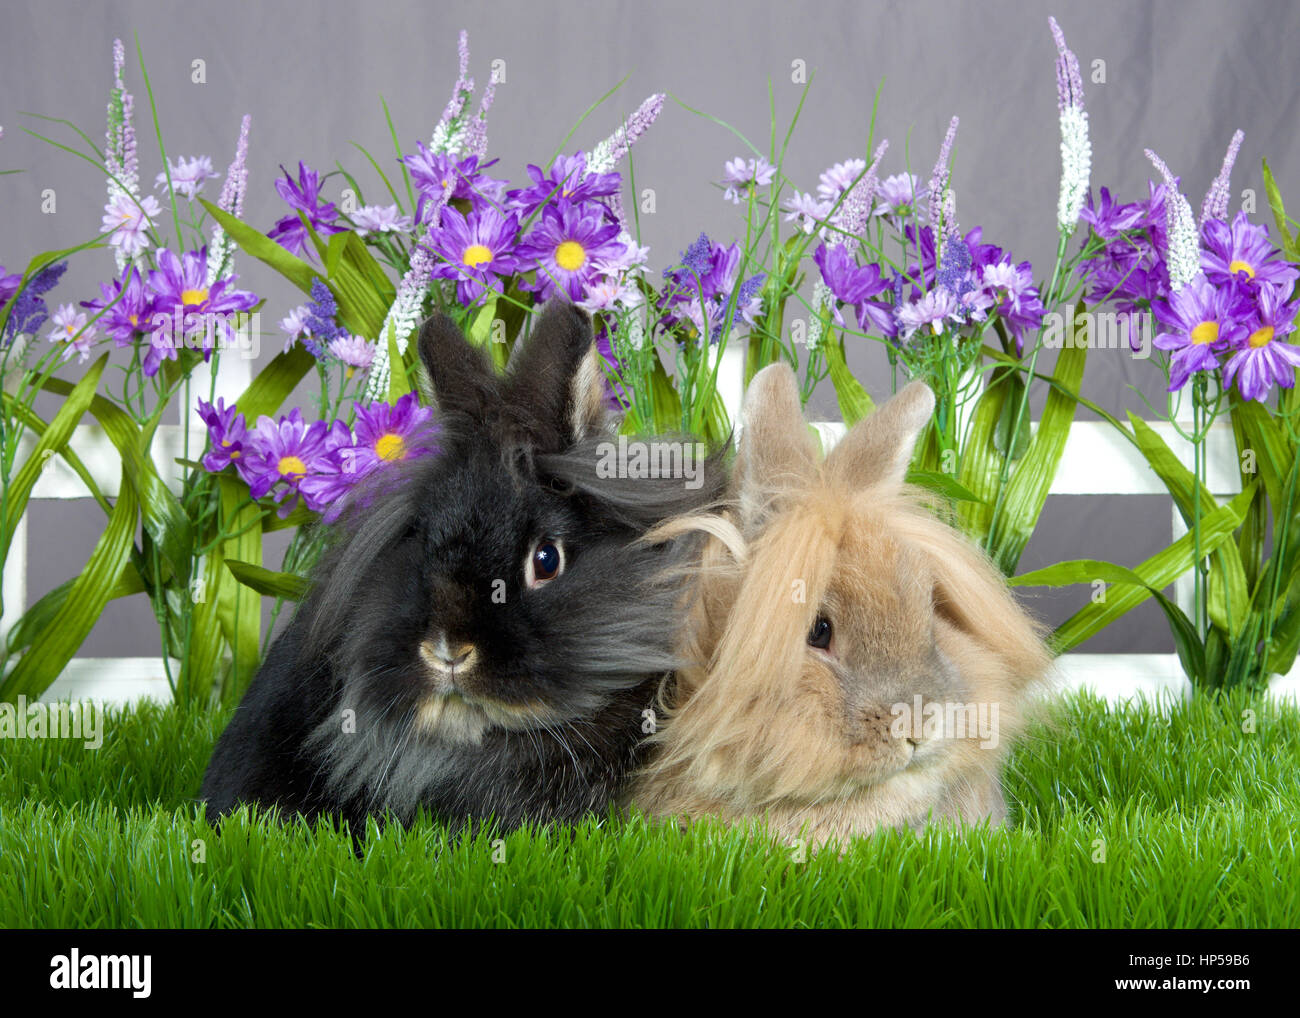 One small brown long hair bunny sitting next o one small black long haired bunny, laying in green grass in front of a white picket fence with purple f Stock Photo